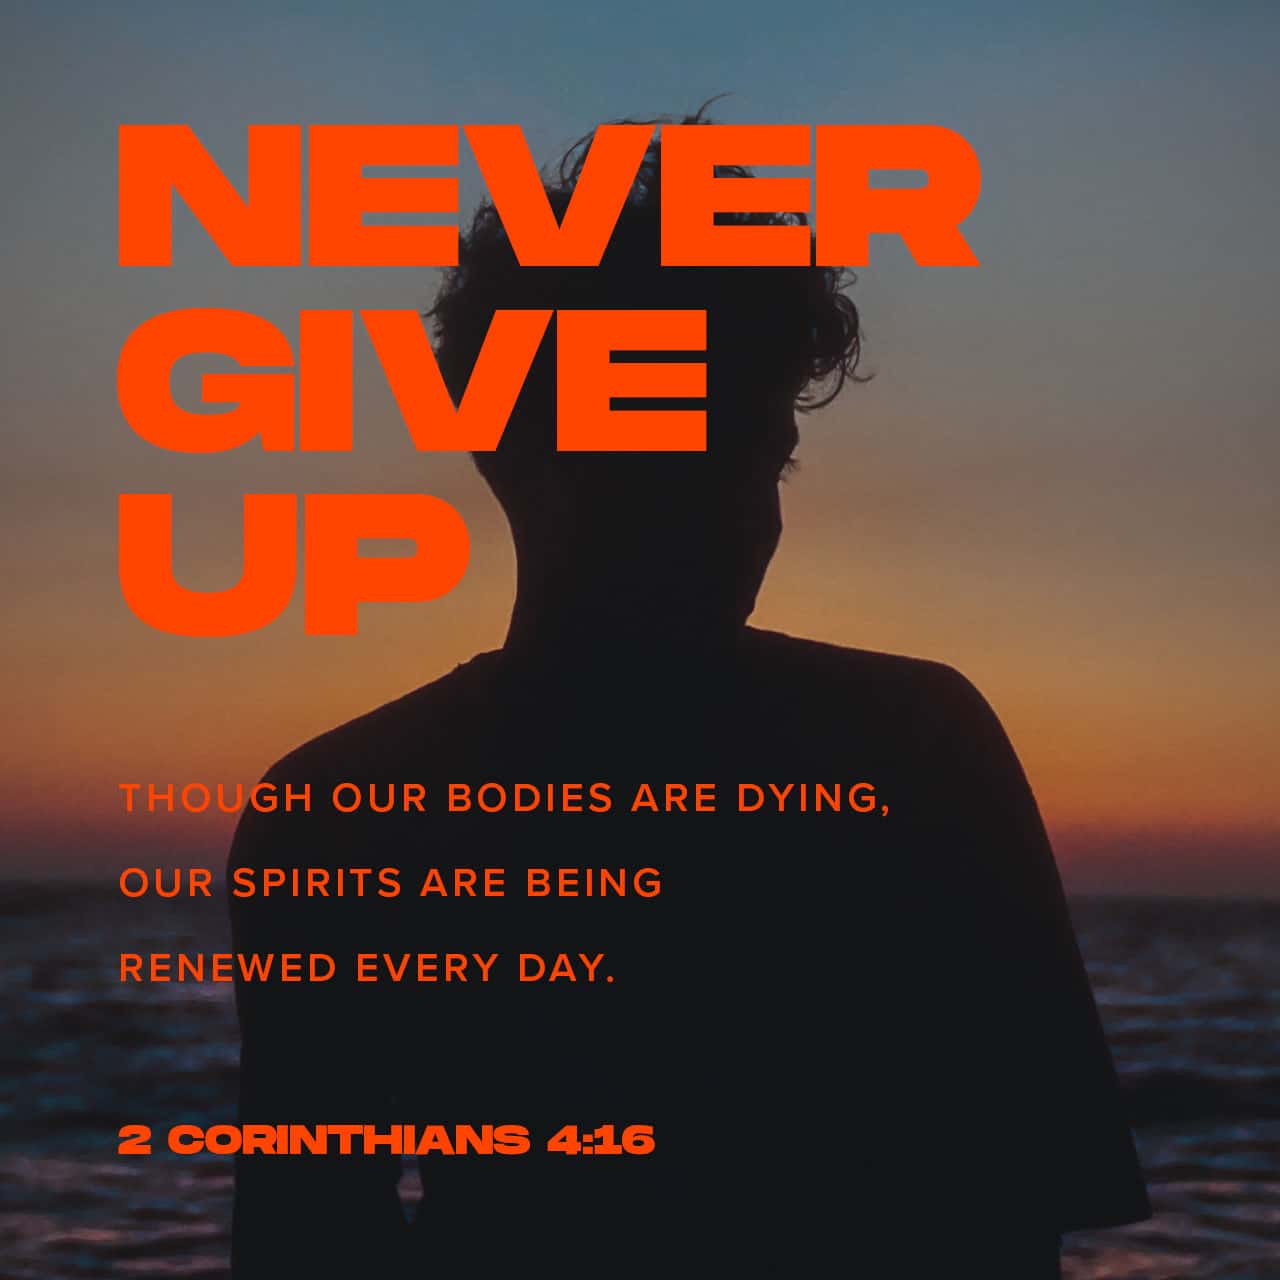 2 Corinthians 4:16-18 For which cause we faint not; but though our outward  man perish, yet the inward man is renewed day by day. For our light  affliction, which is but for